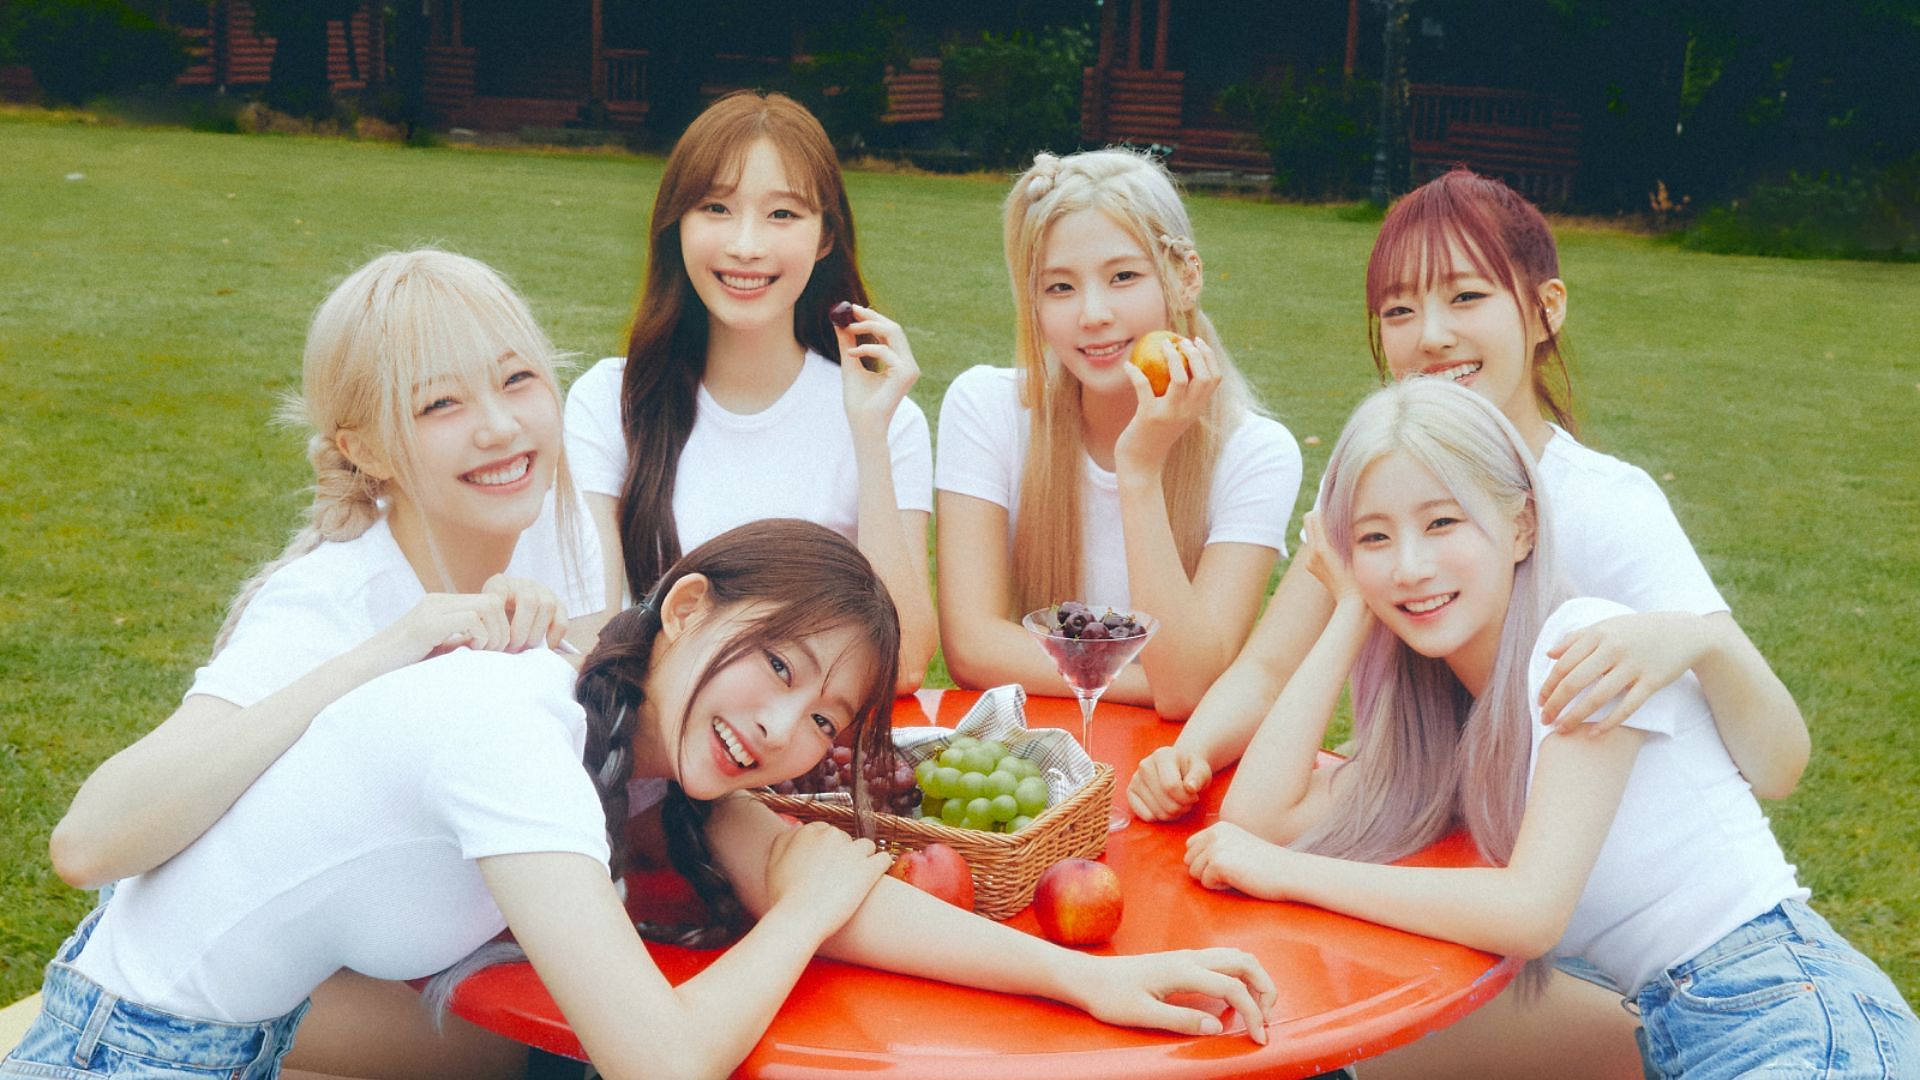 Cignature dish on their fourth EP Us in the Summer in exclusive interview with Sportskeeda (Image via J9 Entertainment and Helix Publicity)